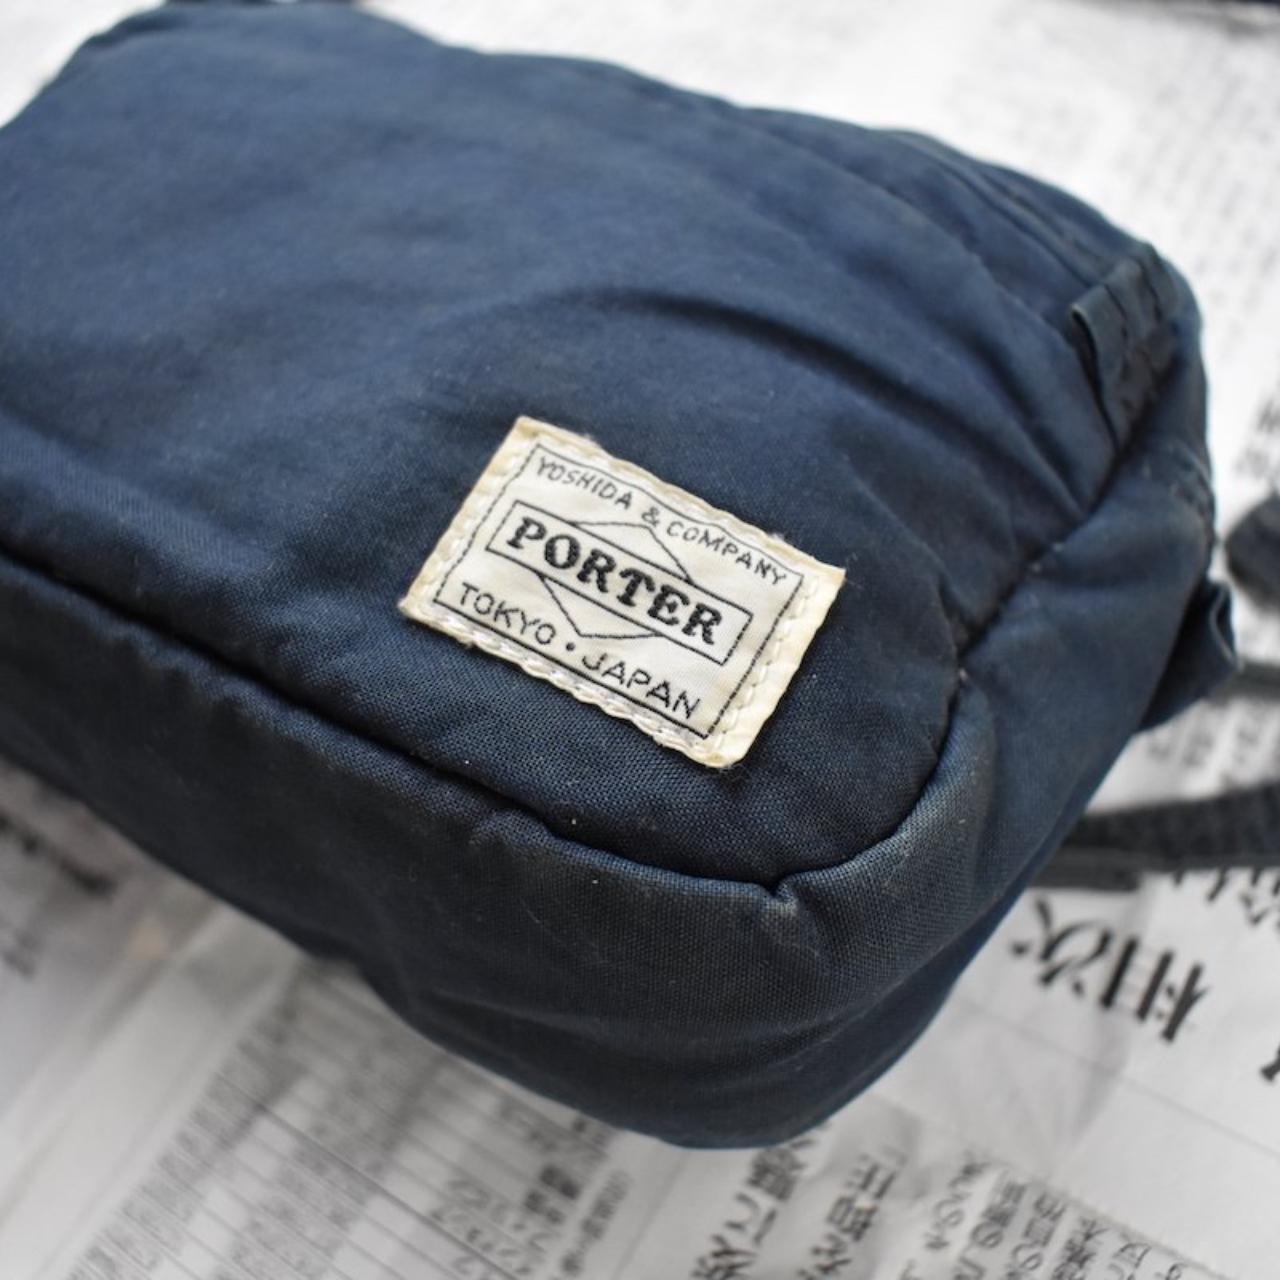 Product Image 2 - Small Pouch Bag by Porter